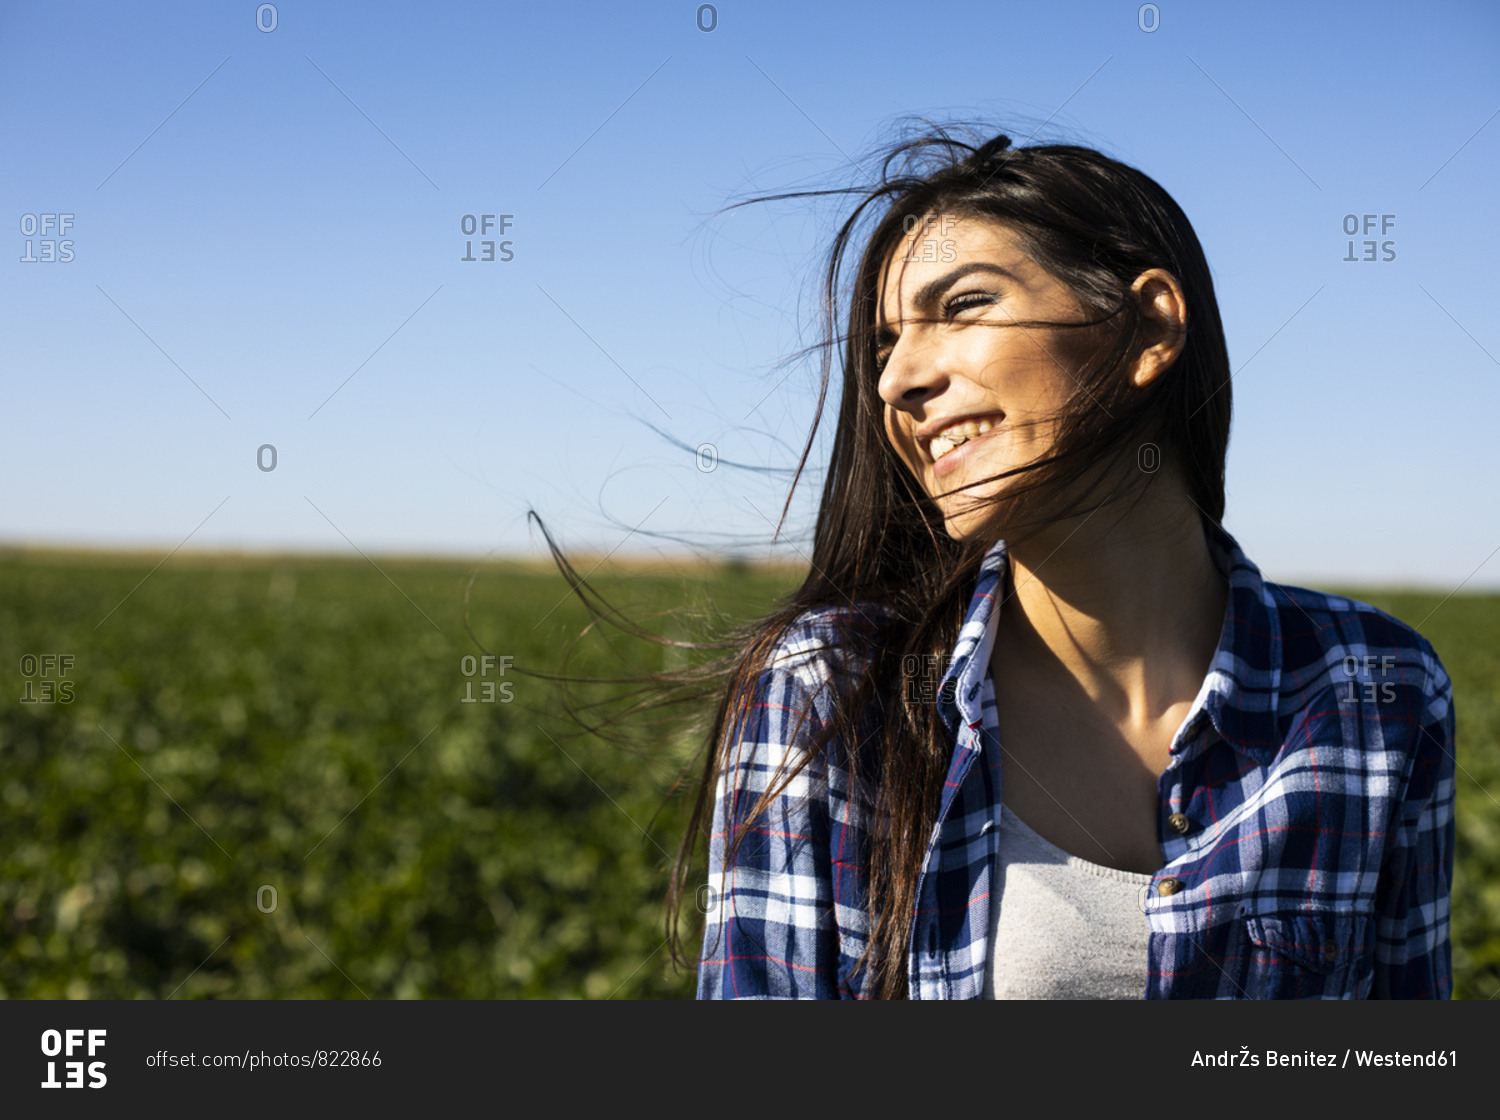 Young woman farmer with hoe on field